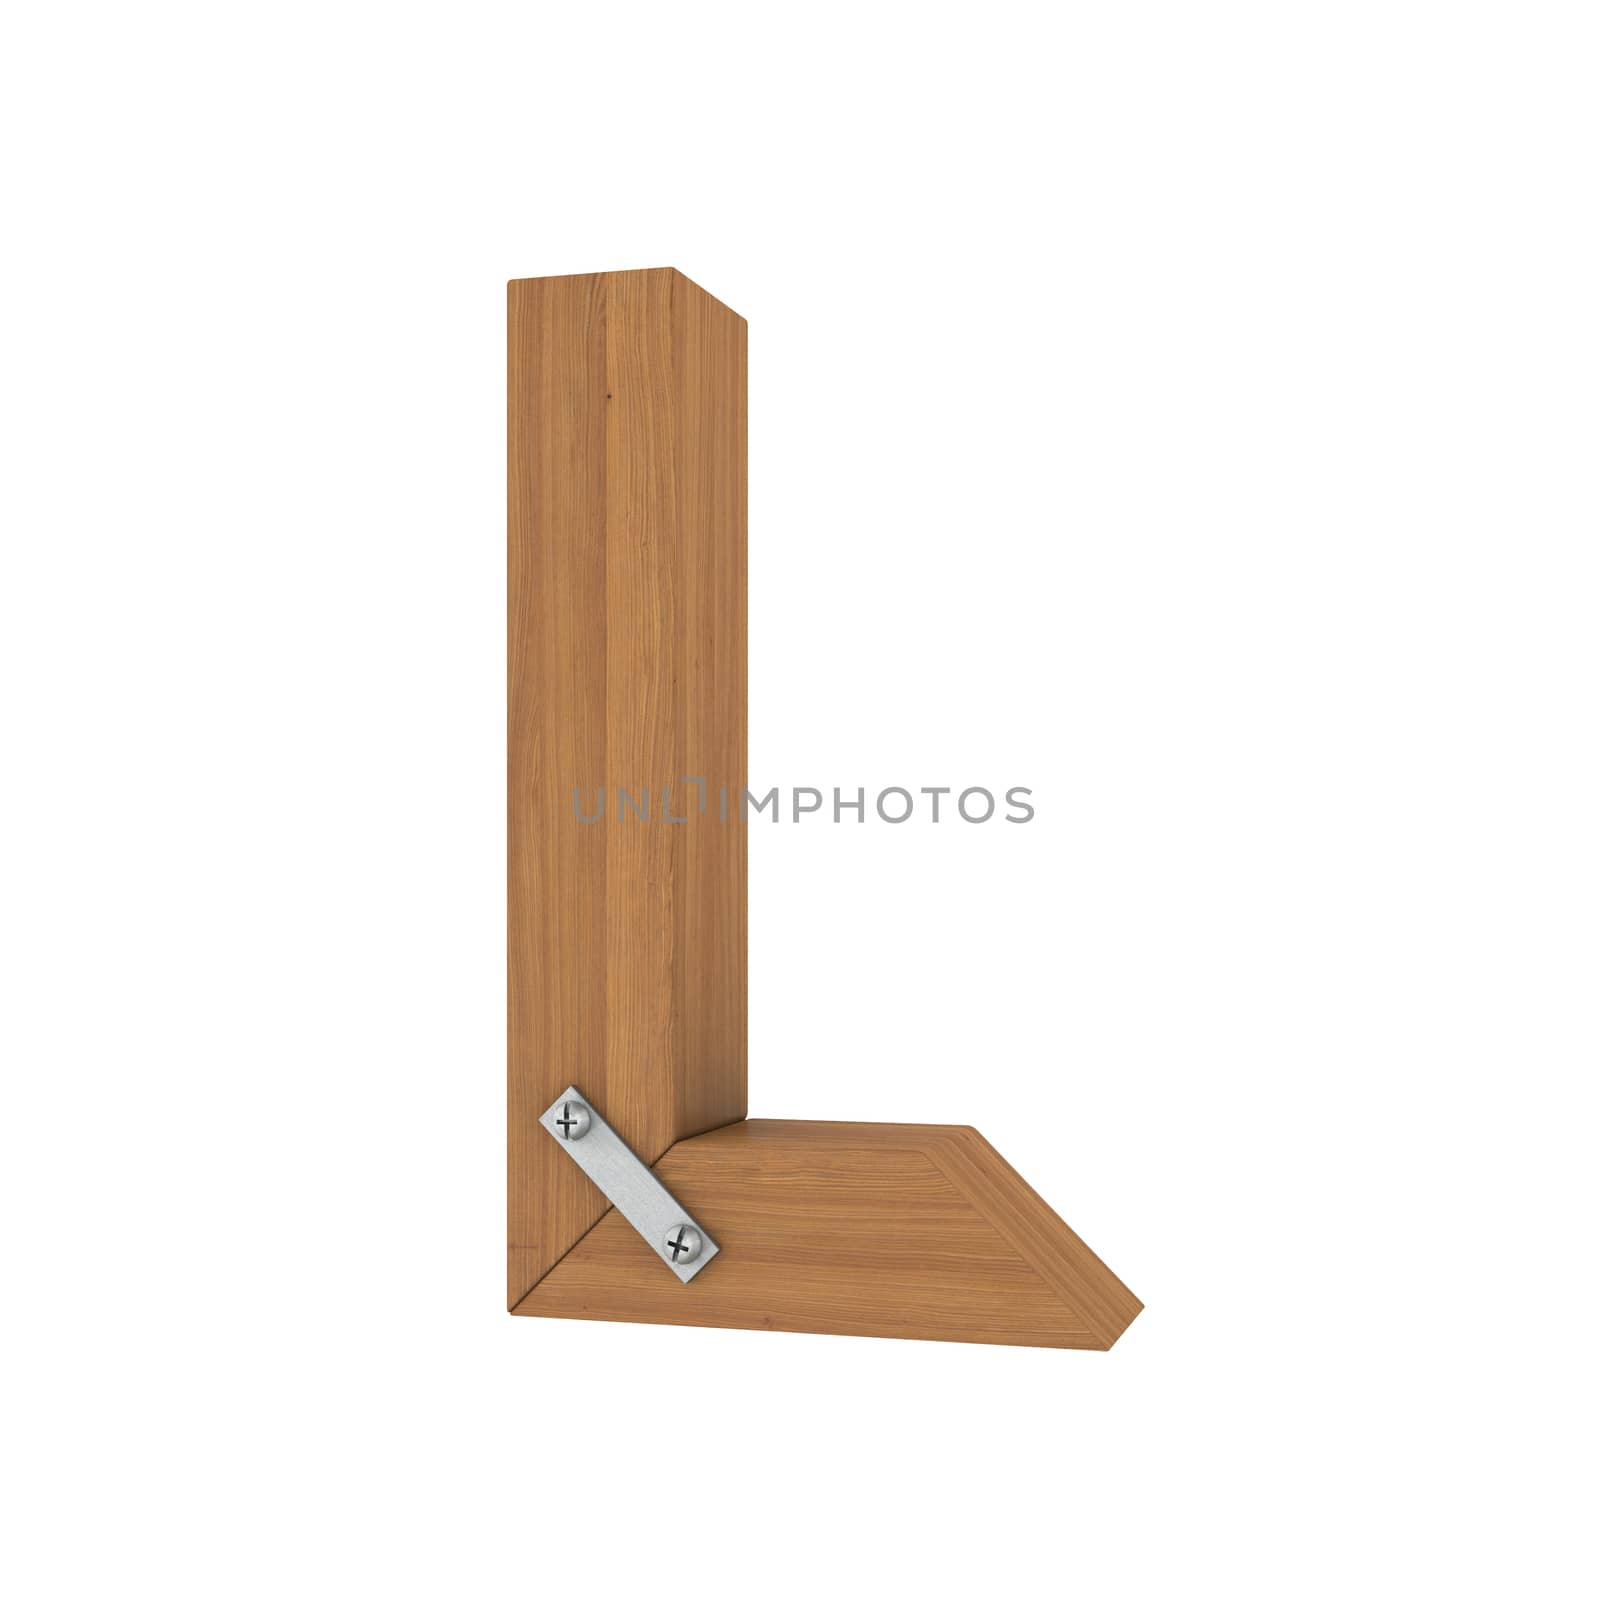 Wooden letter L. Isolated render on a white background